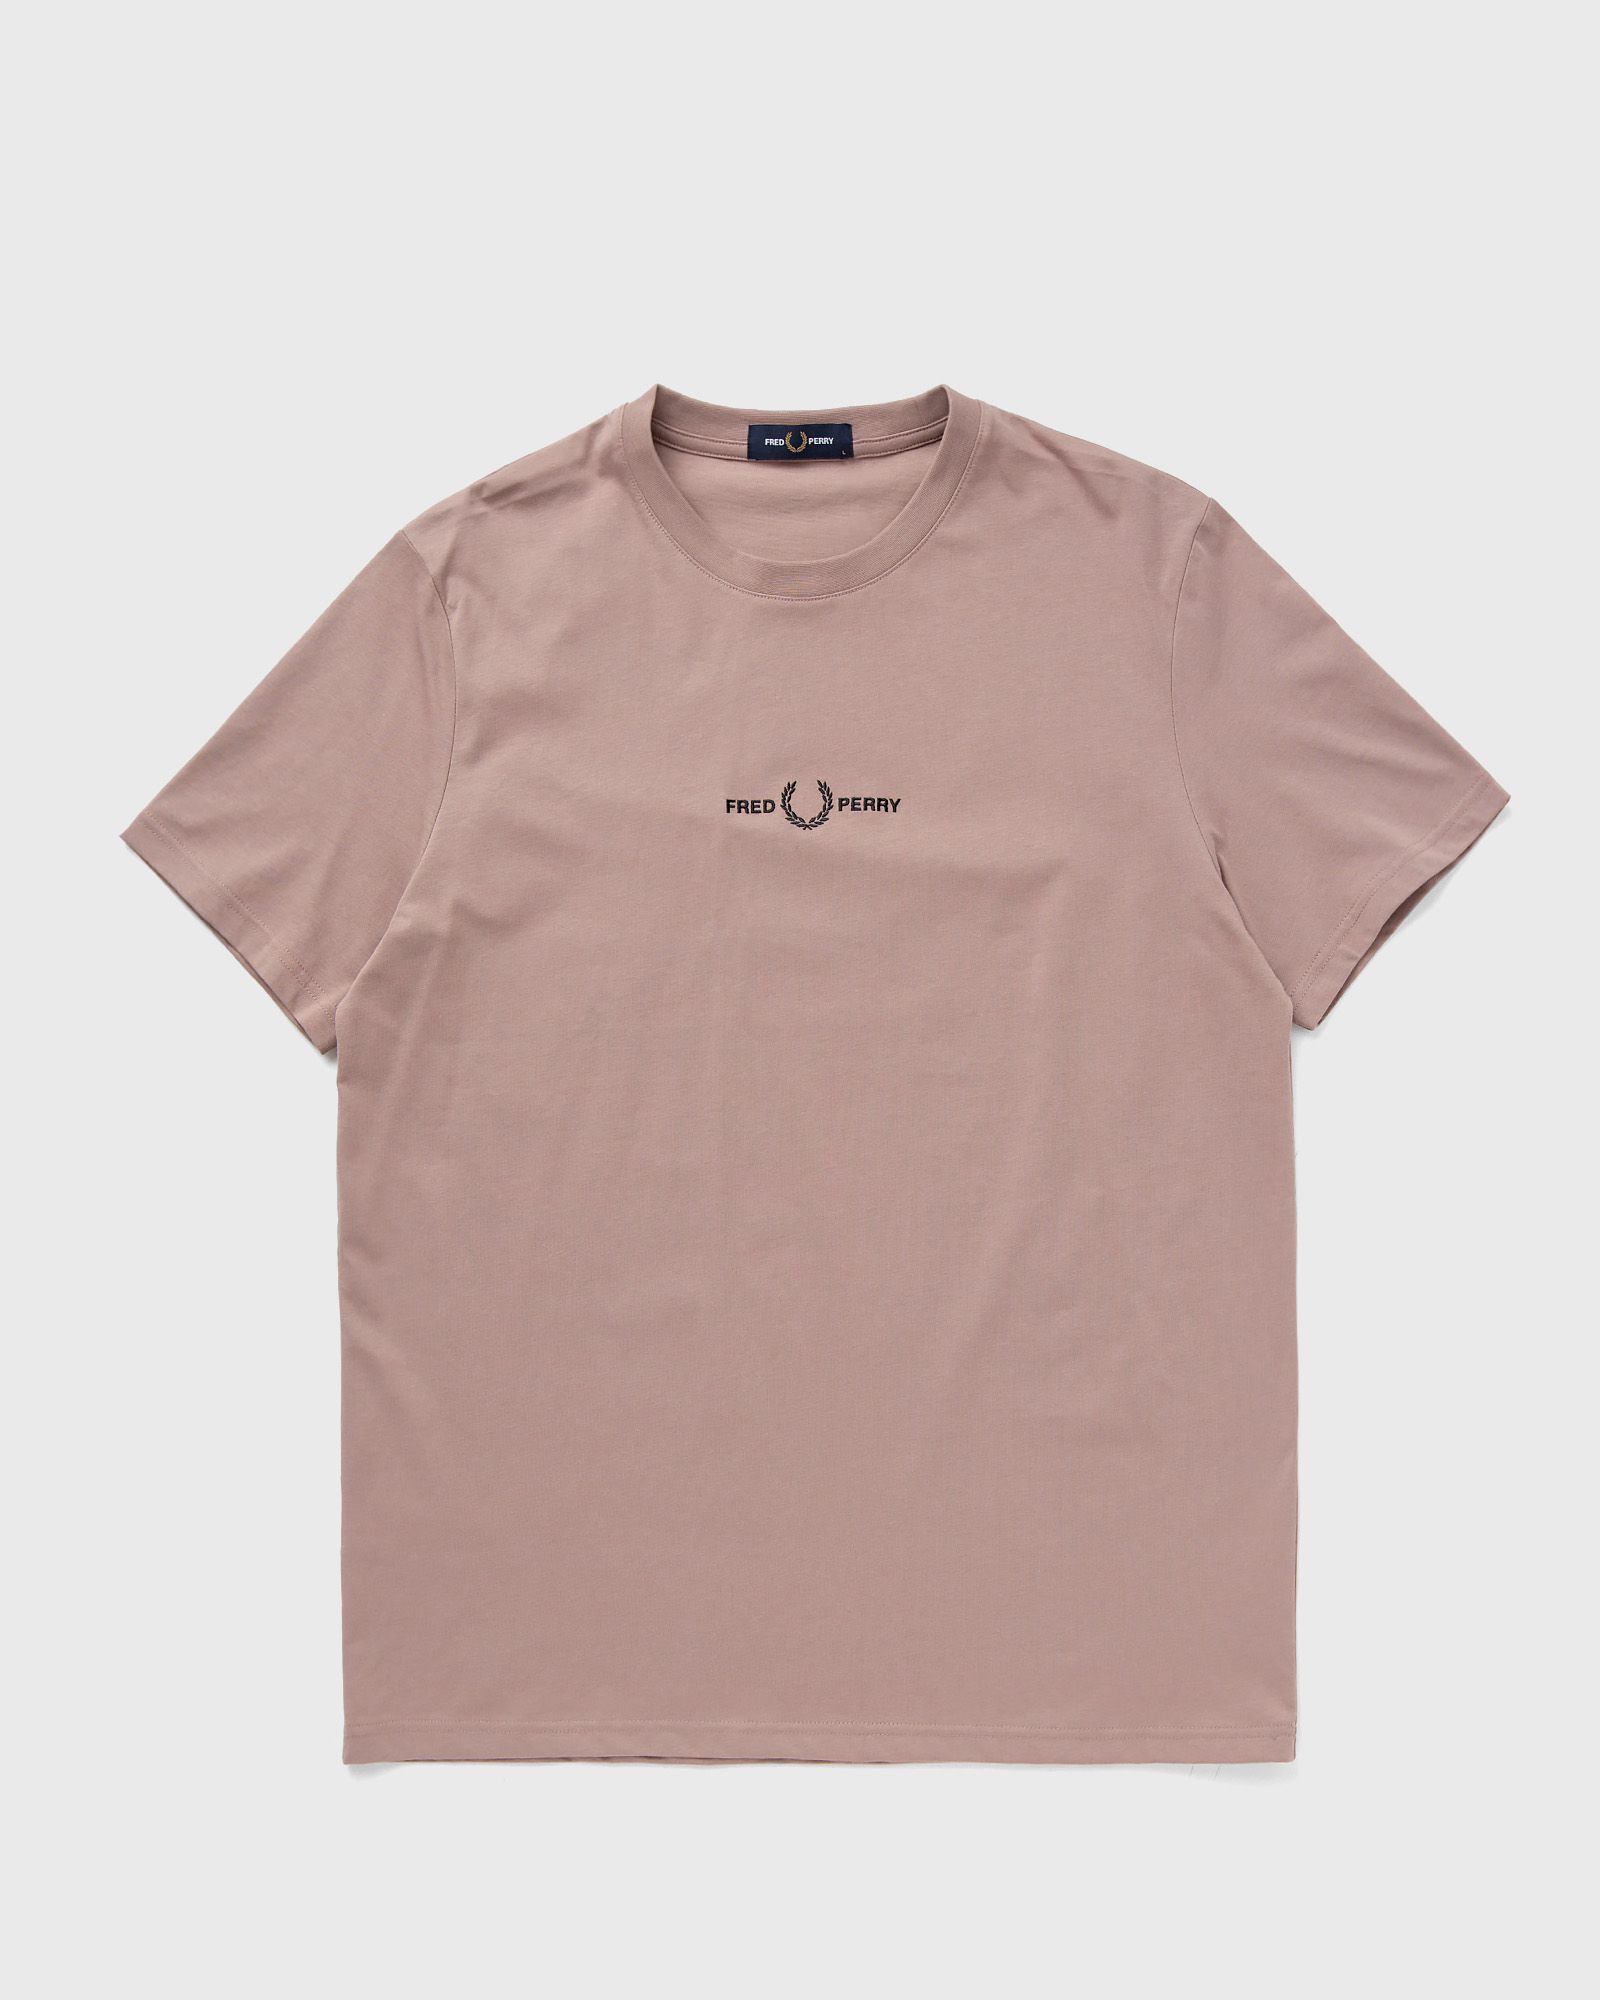 Fred Perry - embroidered t-shirt men shortsleeves pink in größe:xxl